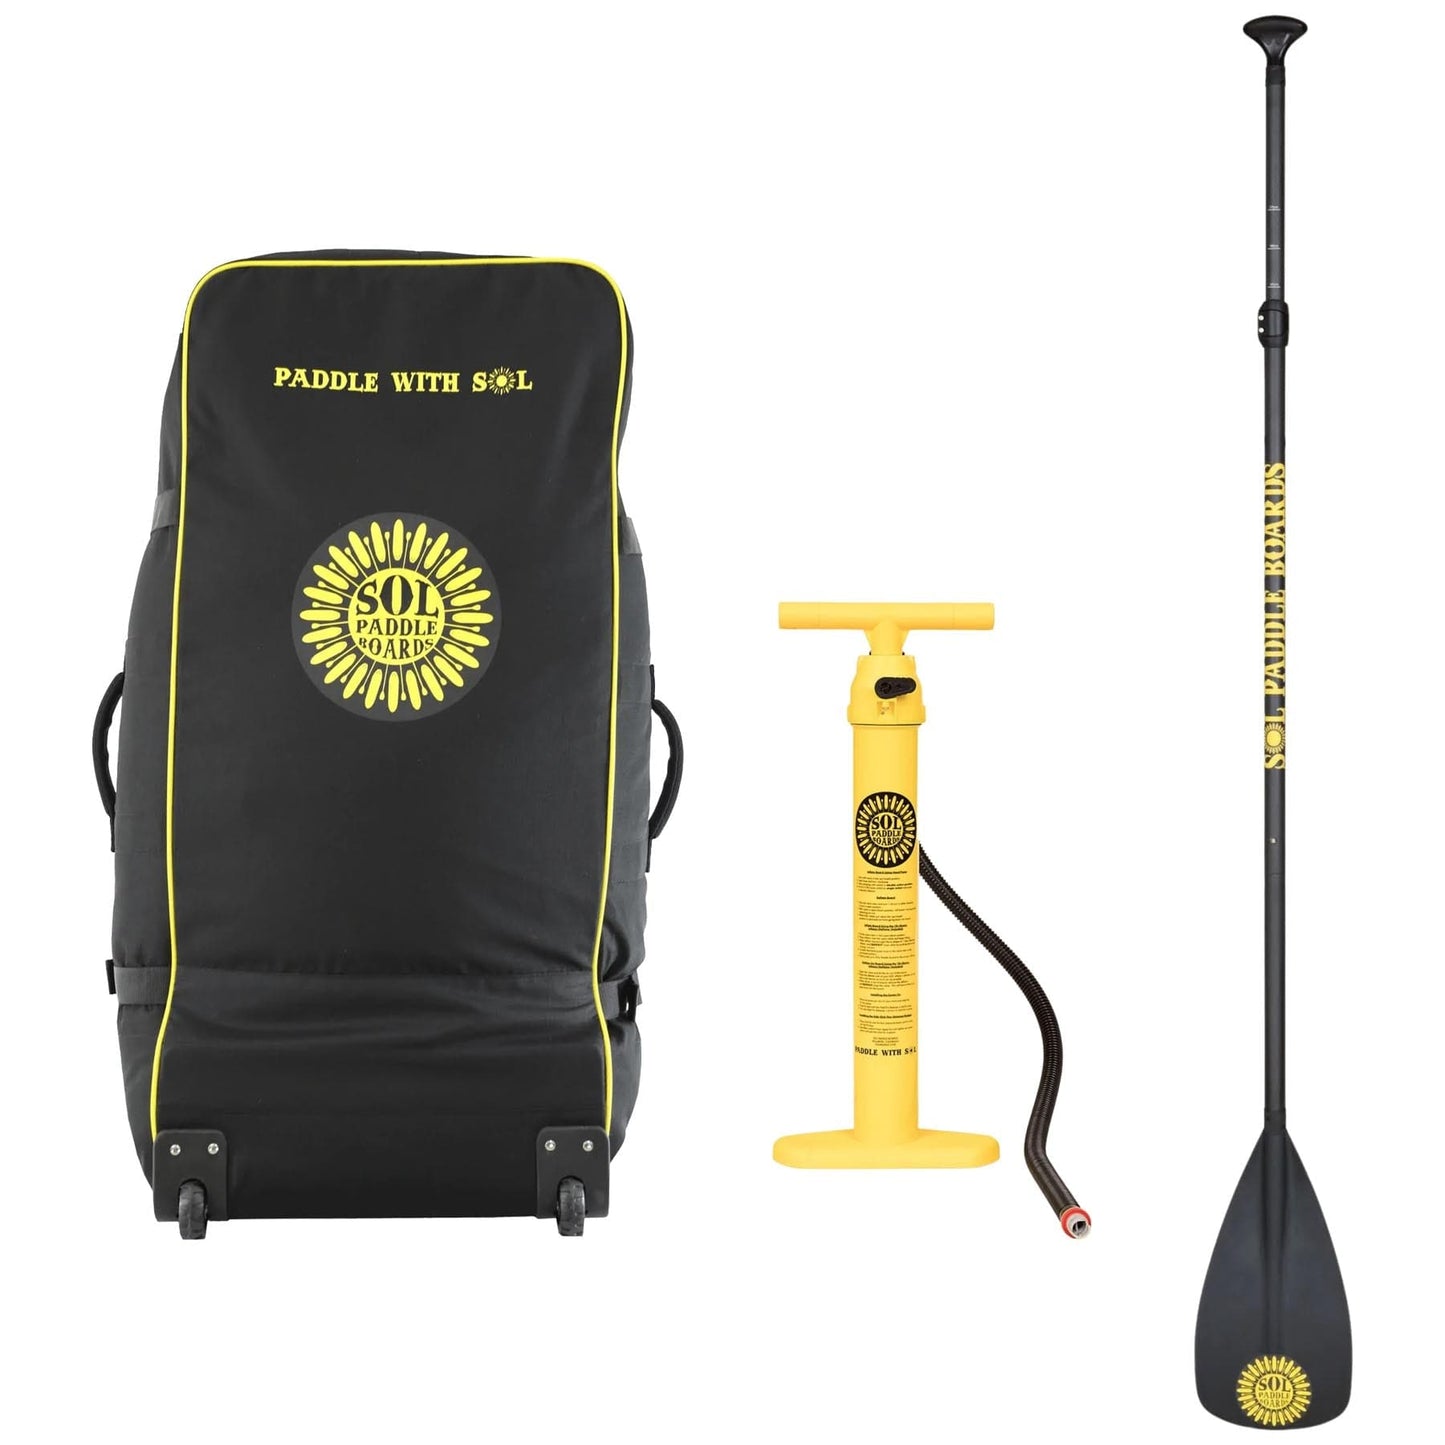 Inflatable SUP accessories including a SOLshine black backpack with the SOL logo, a manual air pump, and a paddle, displayed on a white background.